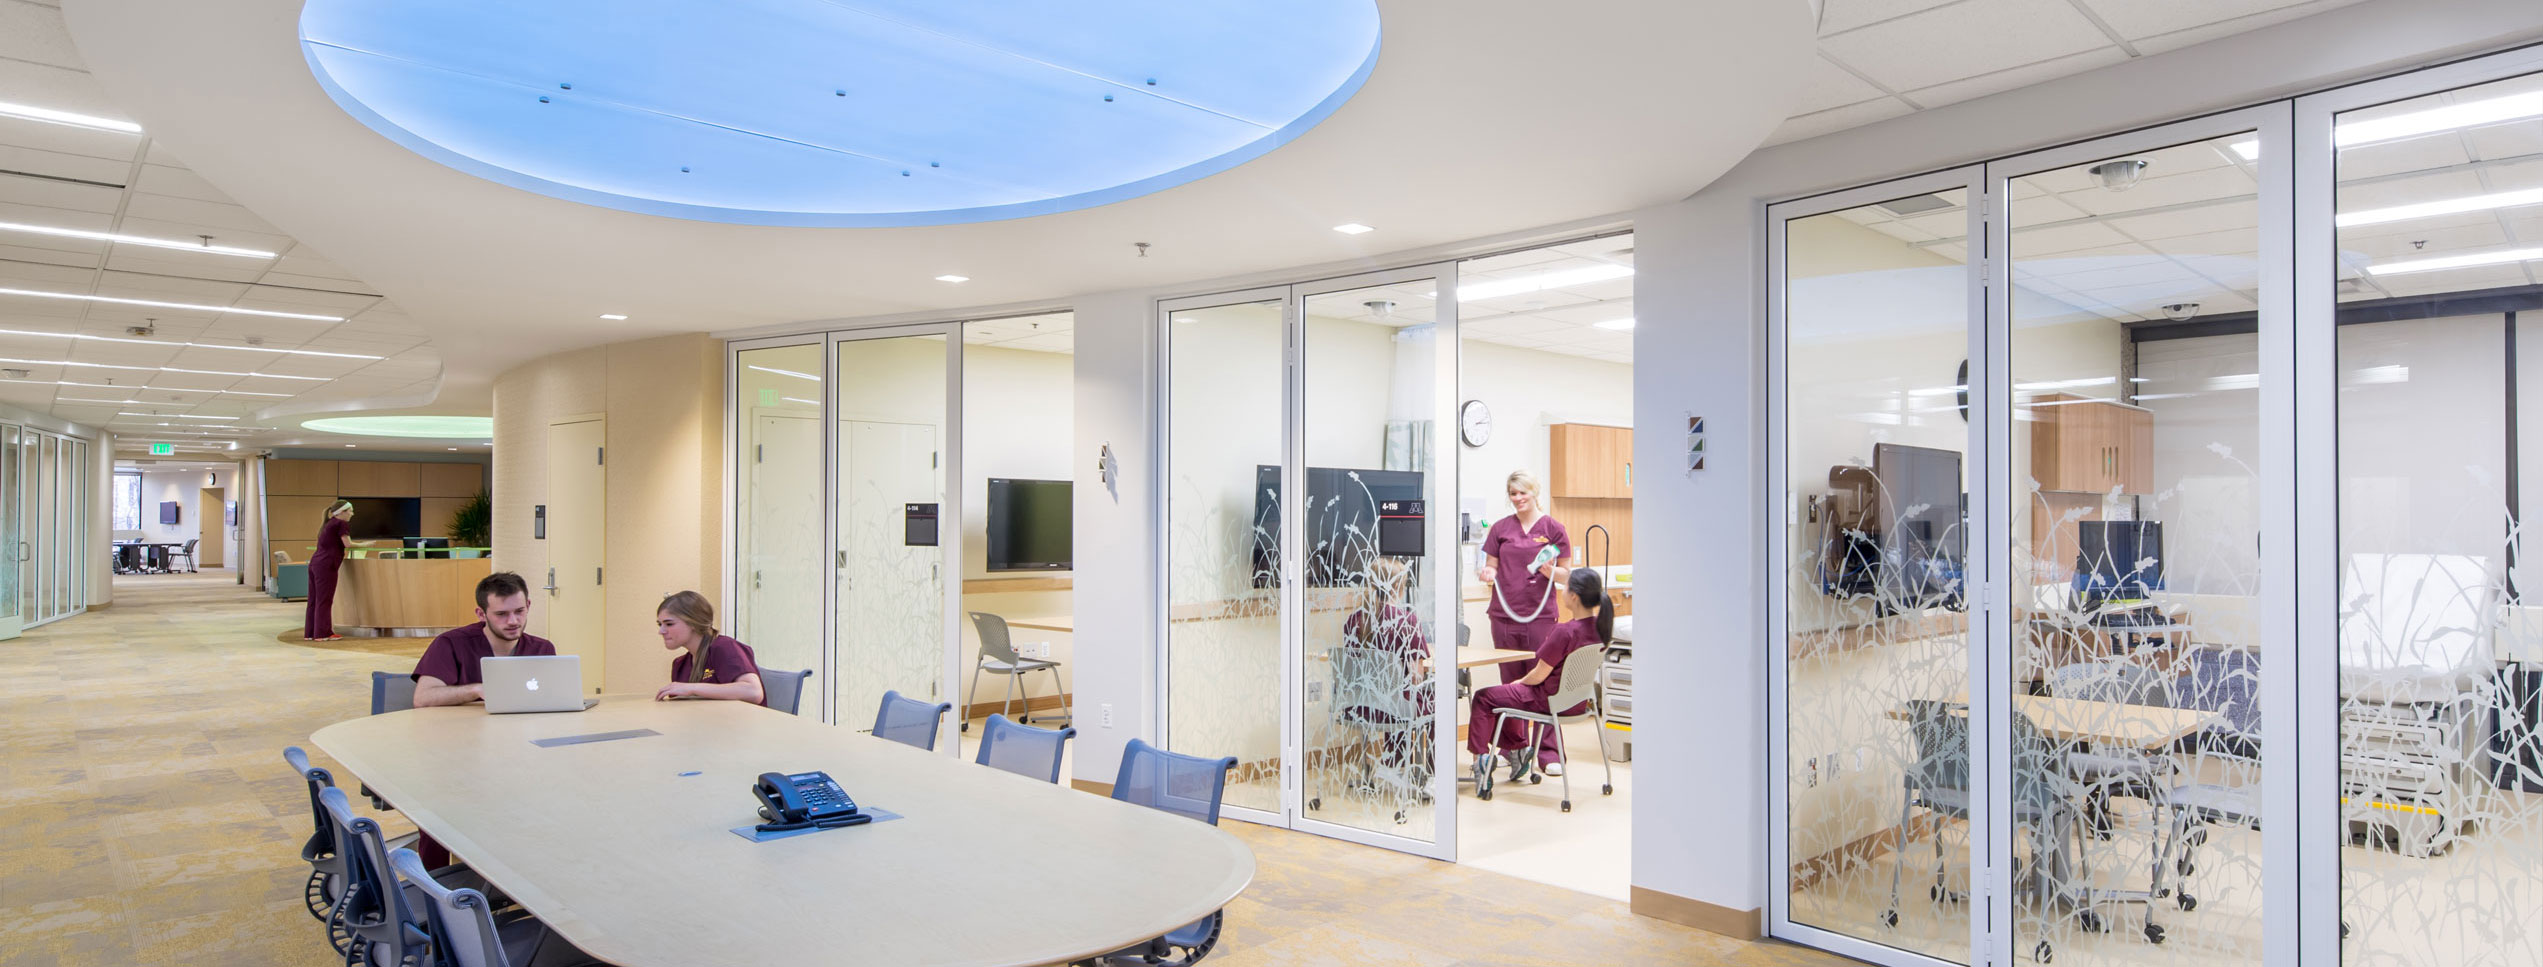 large glass wall medical rooms